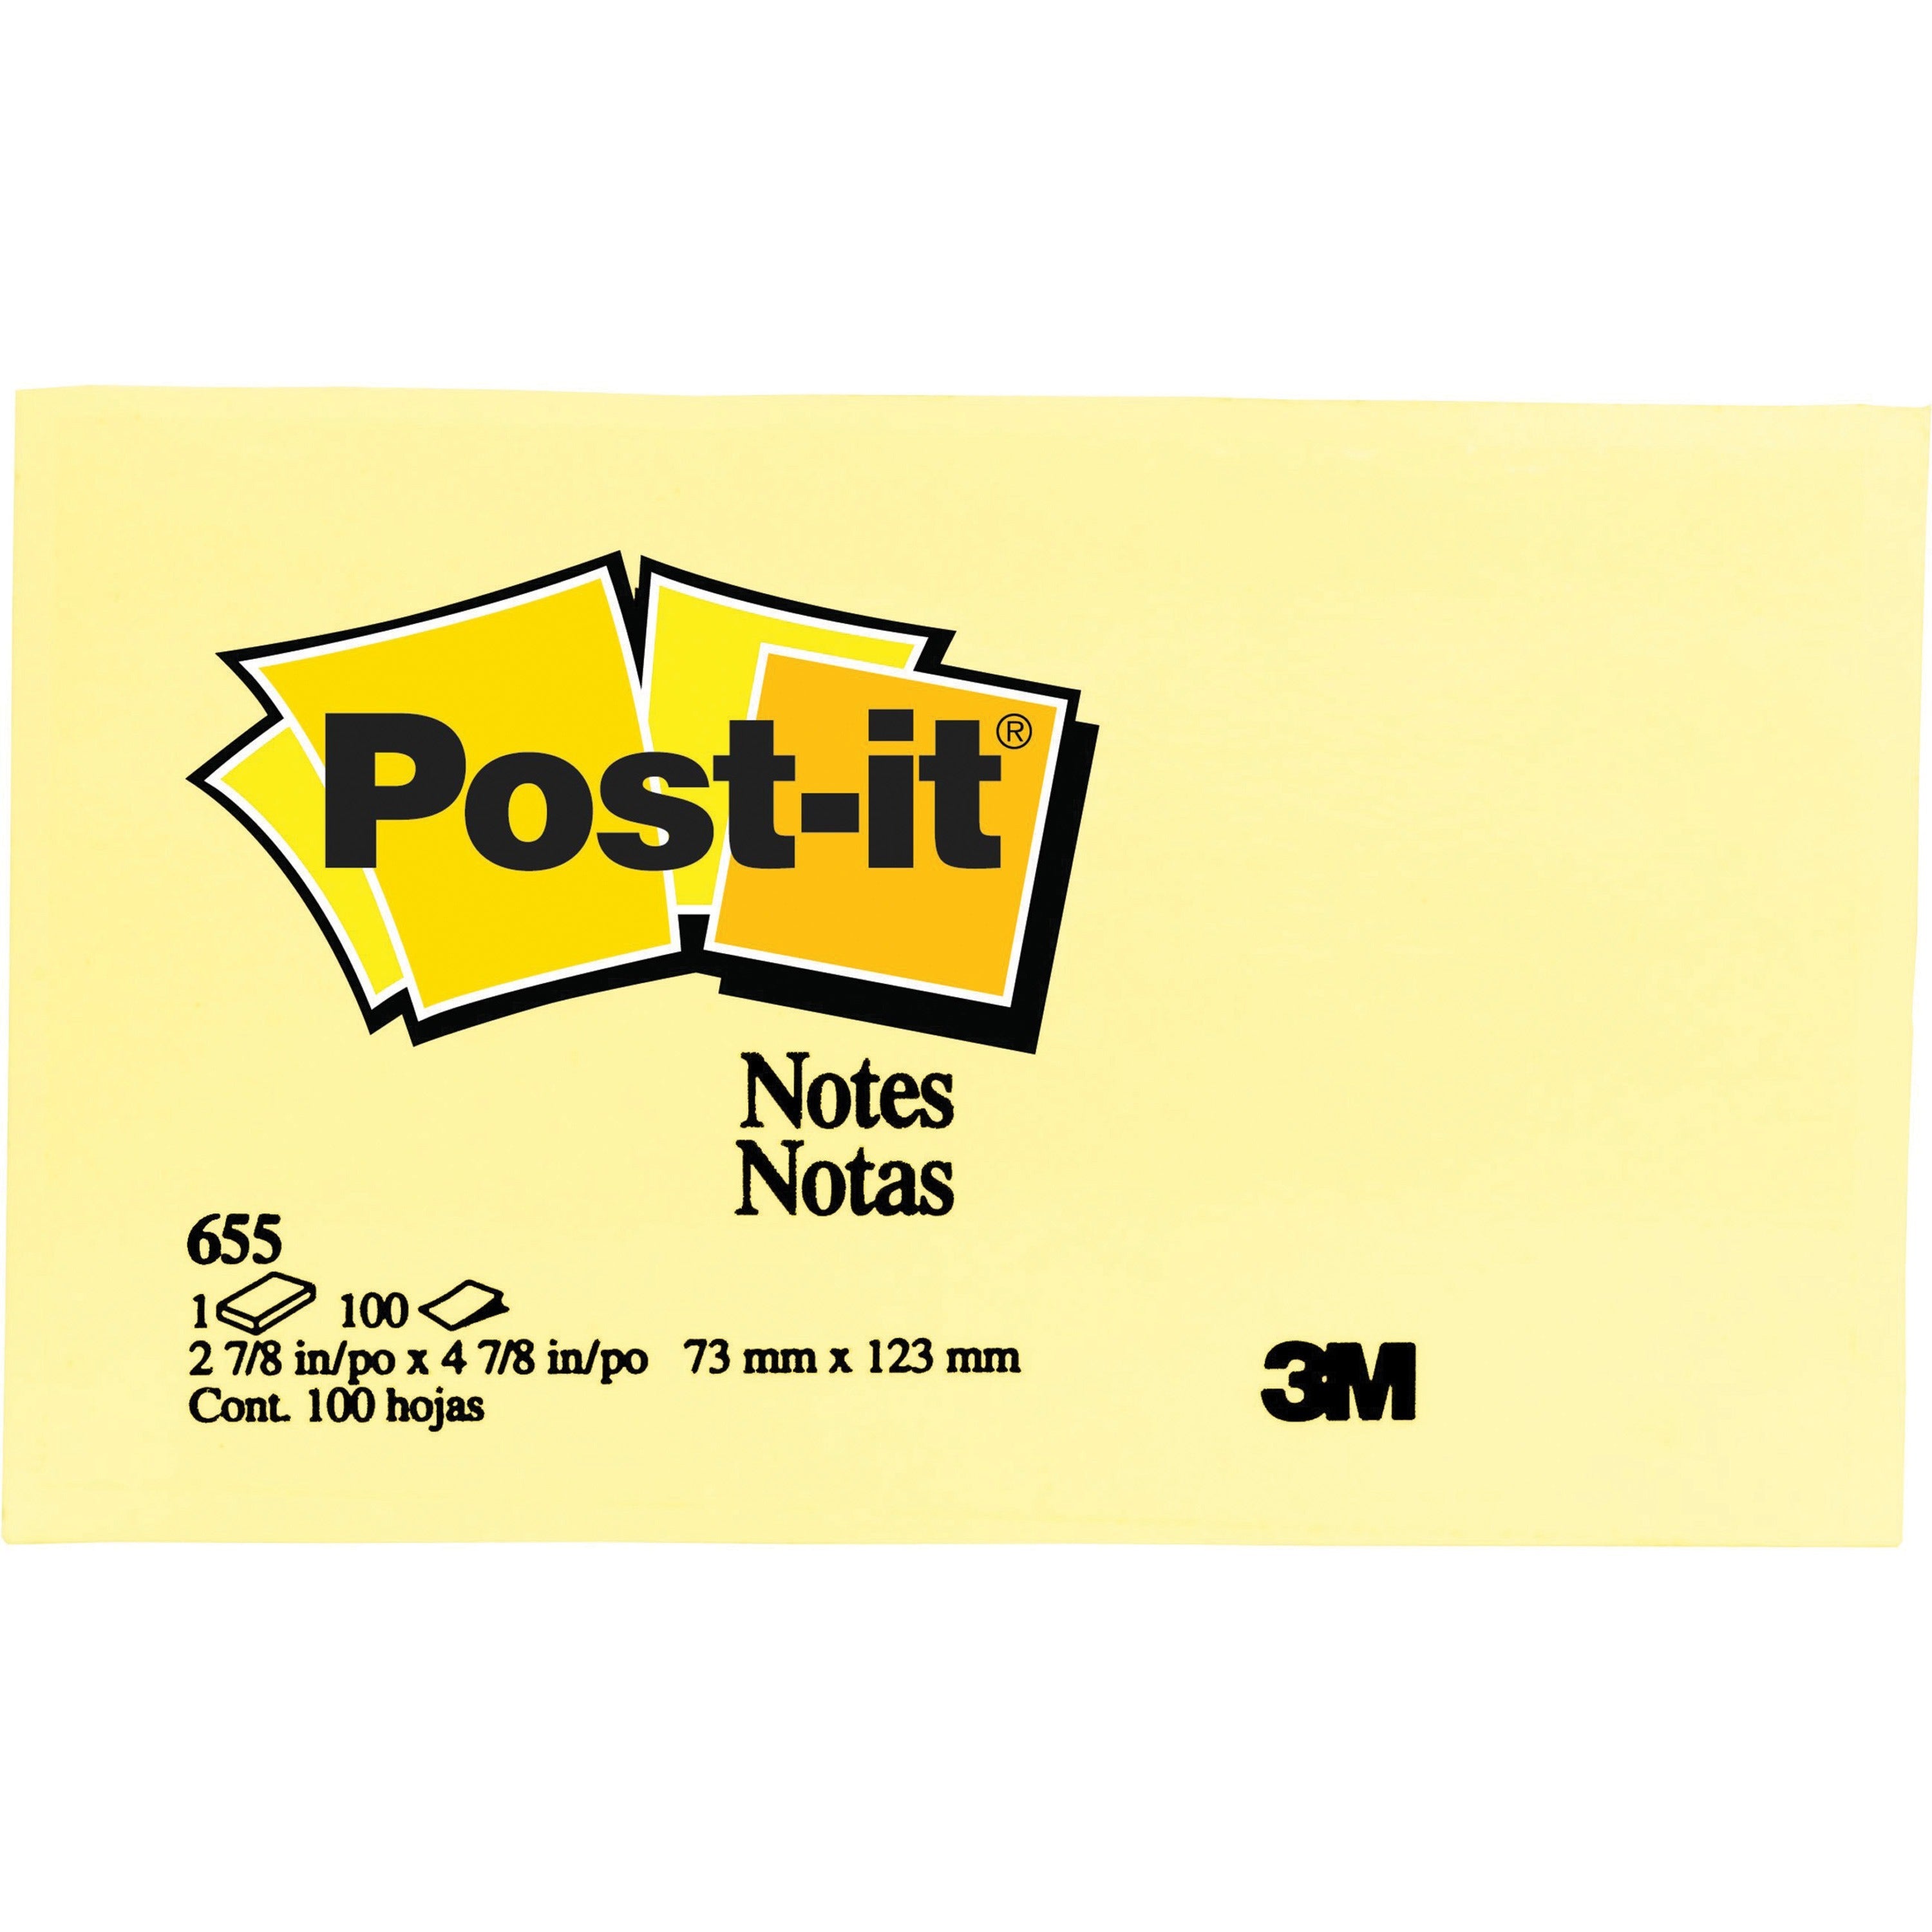 post-it-notes-original-notepads-3-x-5-rectangle-100-sheets-per-pad-unruled-canary-yellow-paper-self-adhesive-repositionable-24-bundle_mmm655ywbd - 2